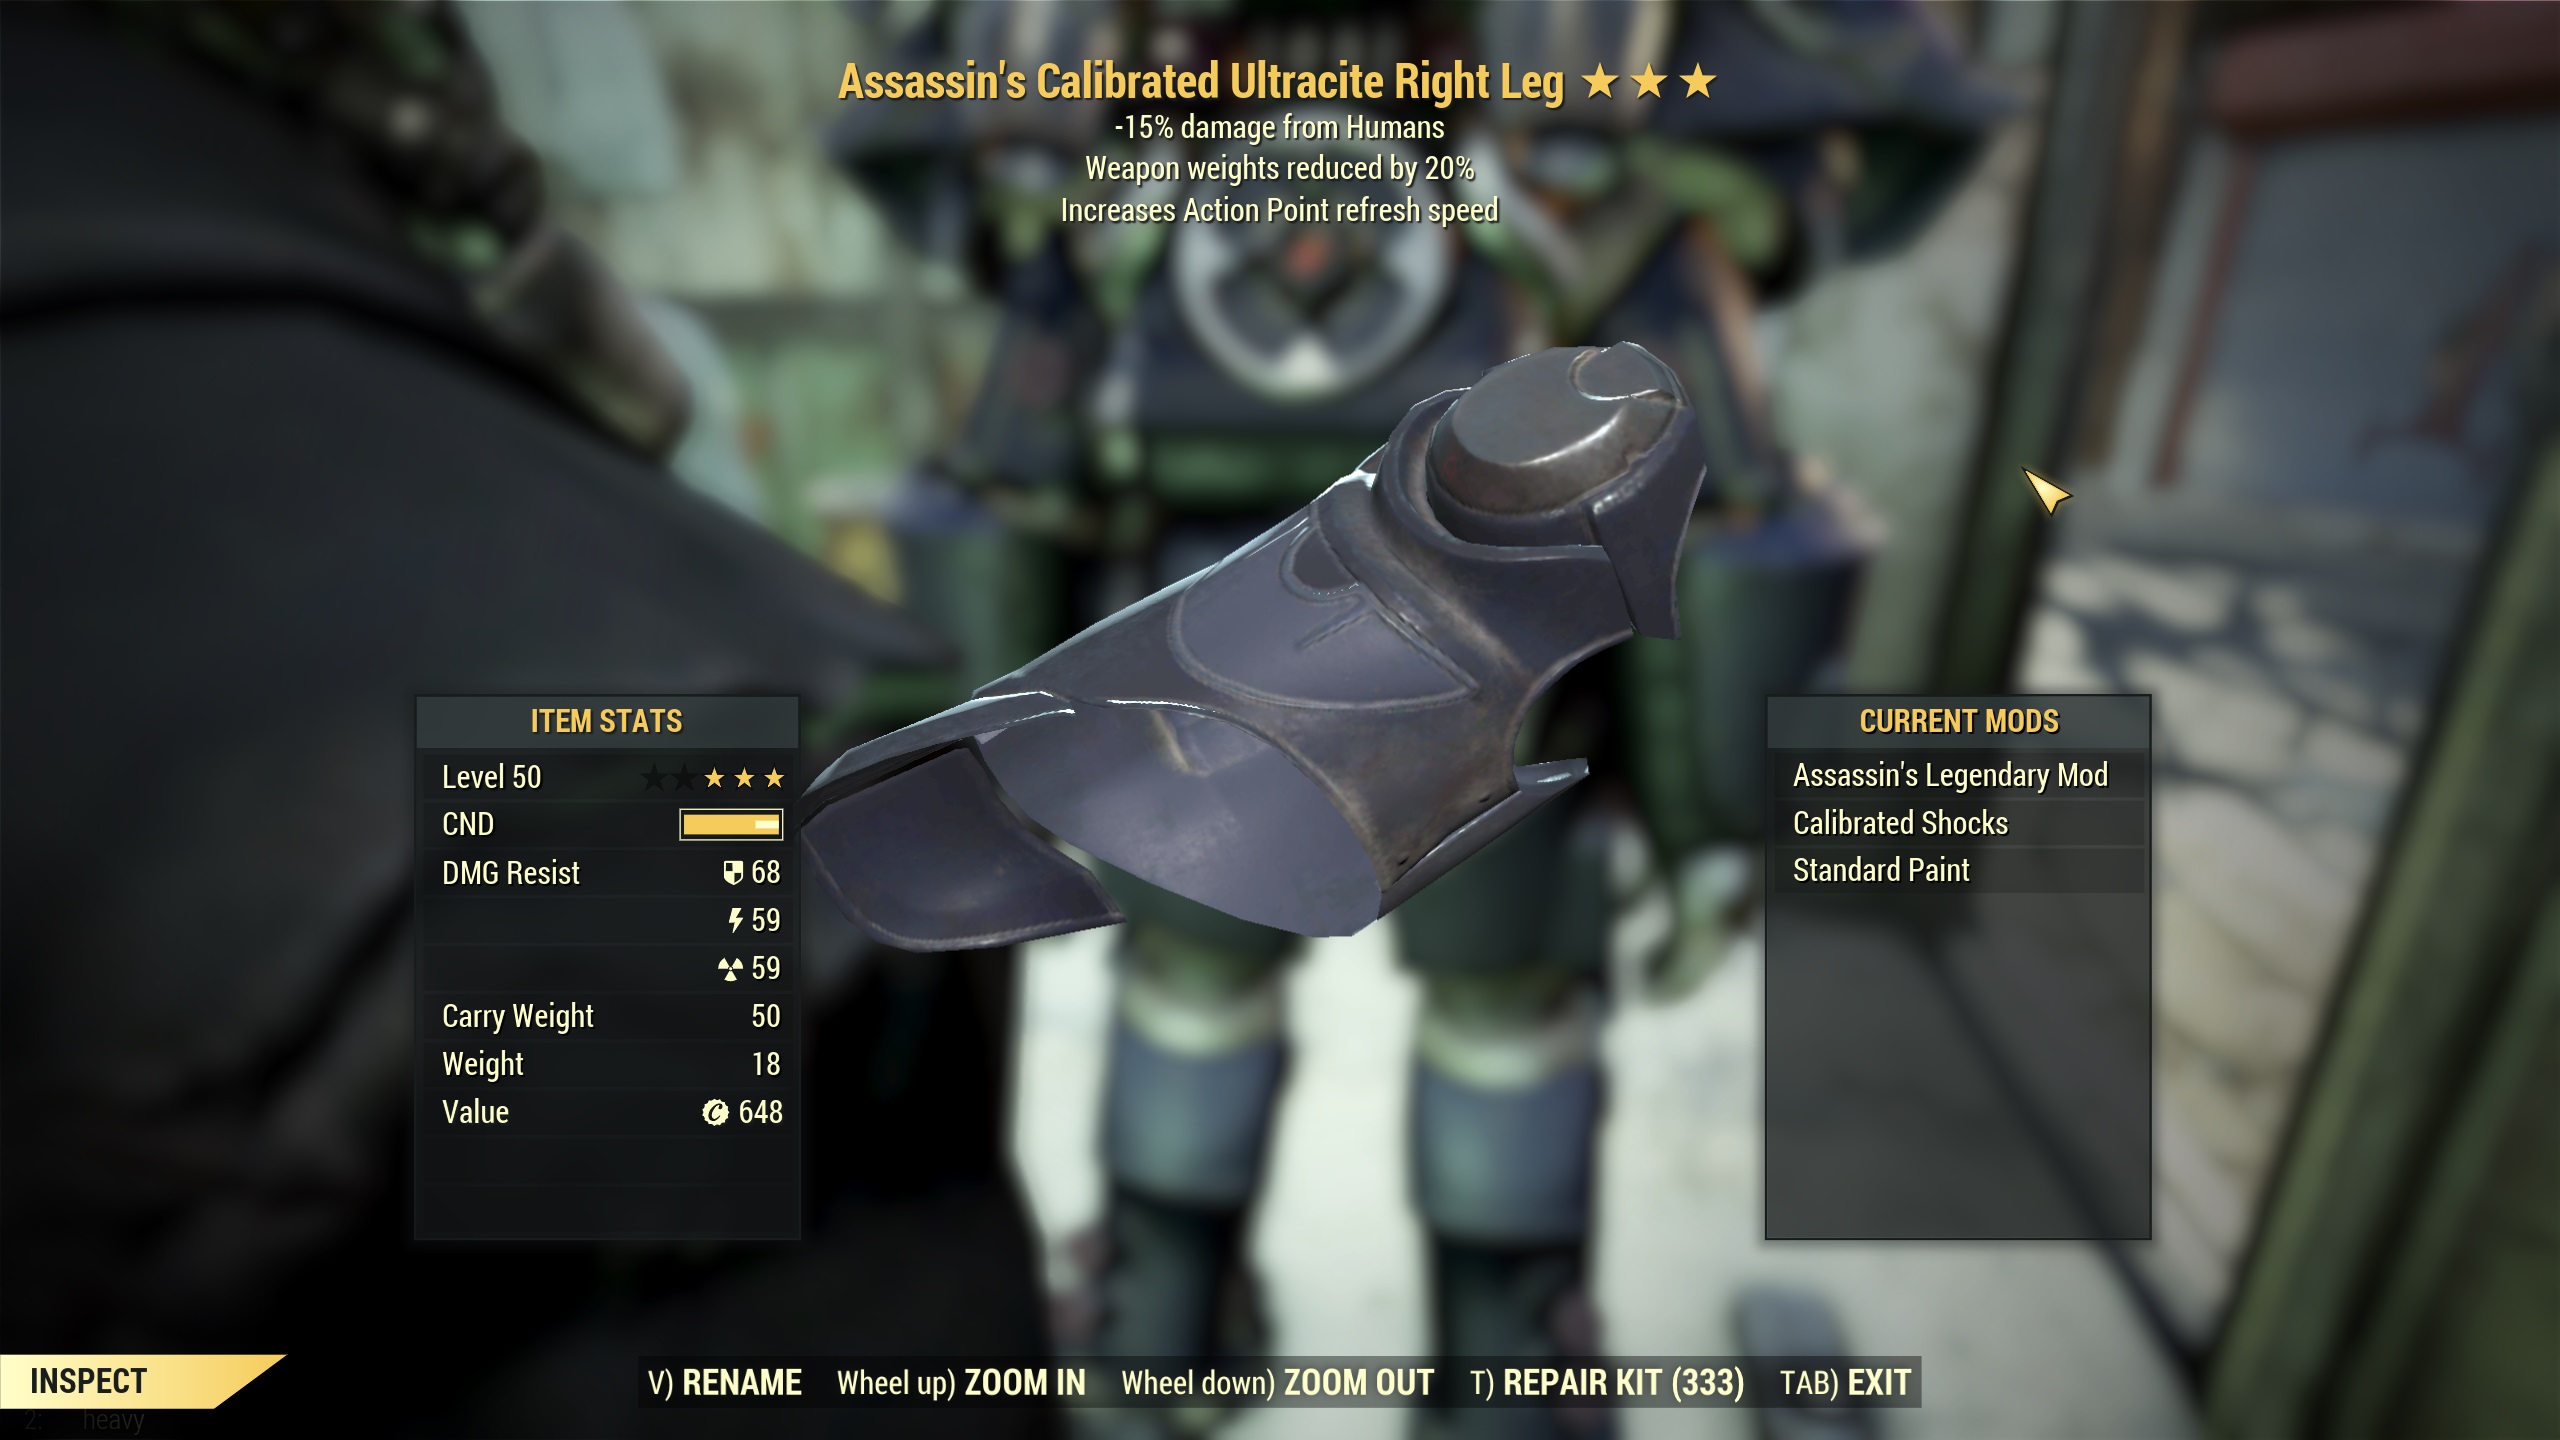 Assassin's WWR Ultracite Power Armor [5/5 AP Refresh] Full Set / With Jet Pack Arm